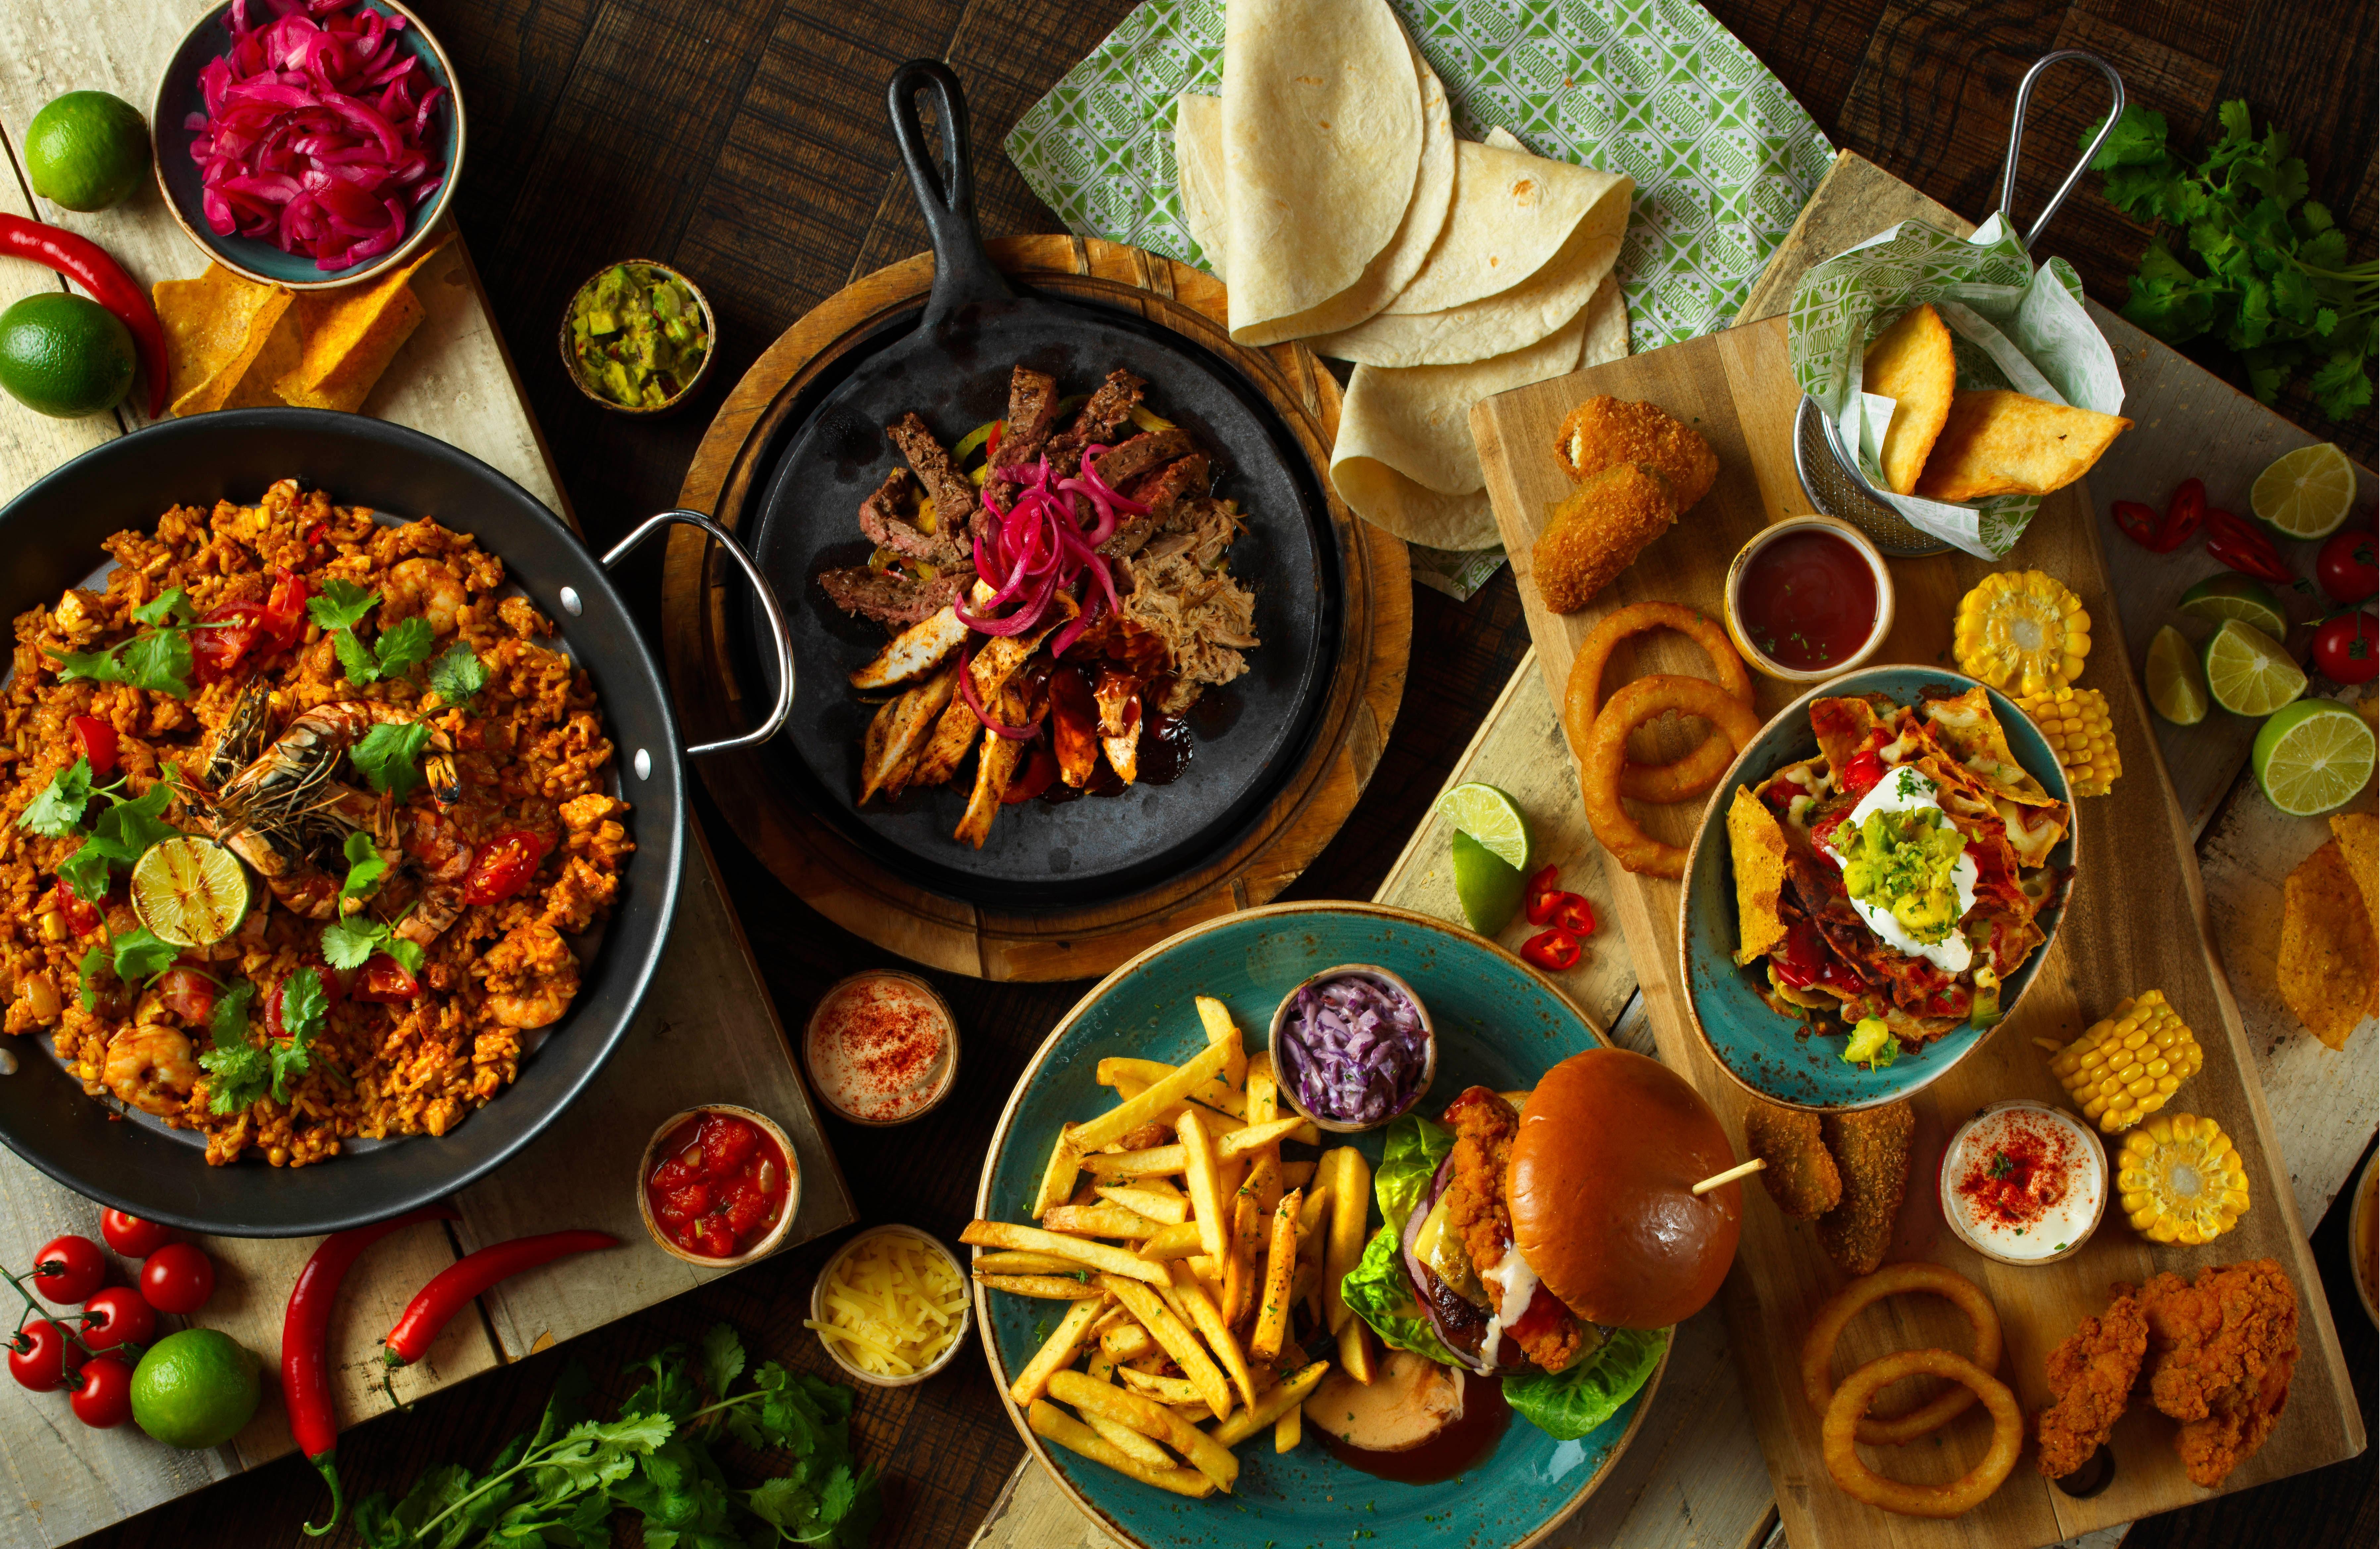 Chiquito Restaurant Bar & Mexican Grill Chiquito Camberley 01276 410130